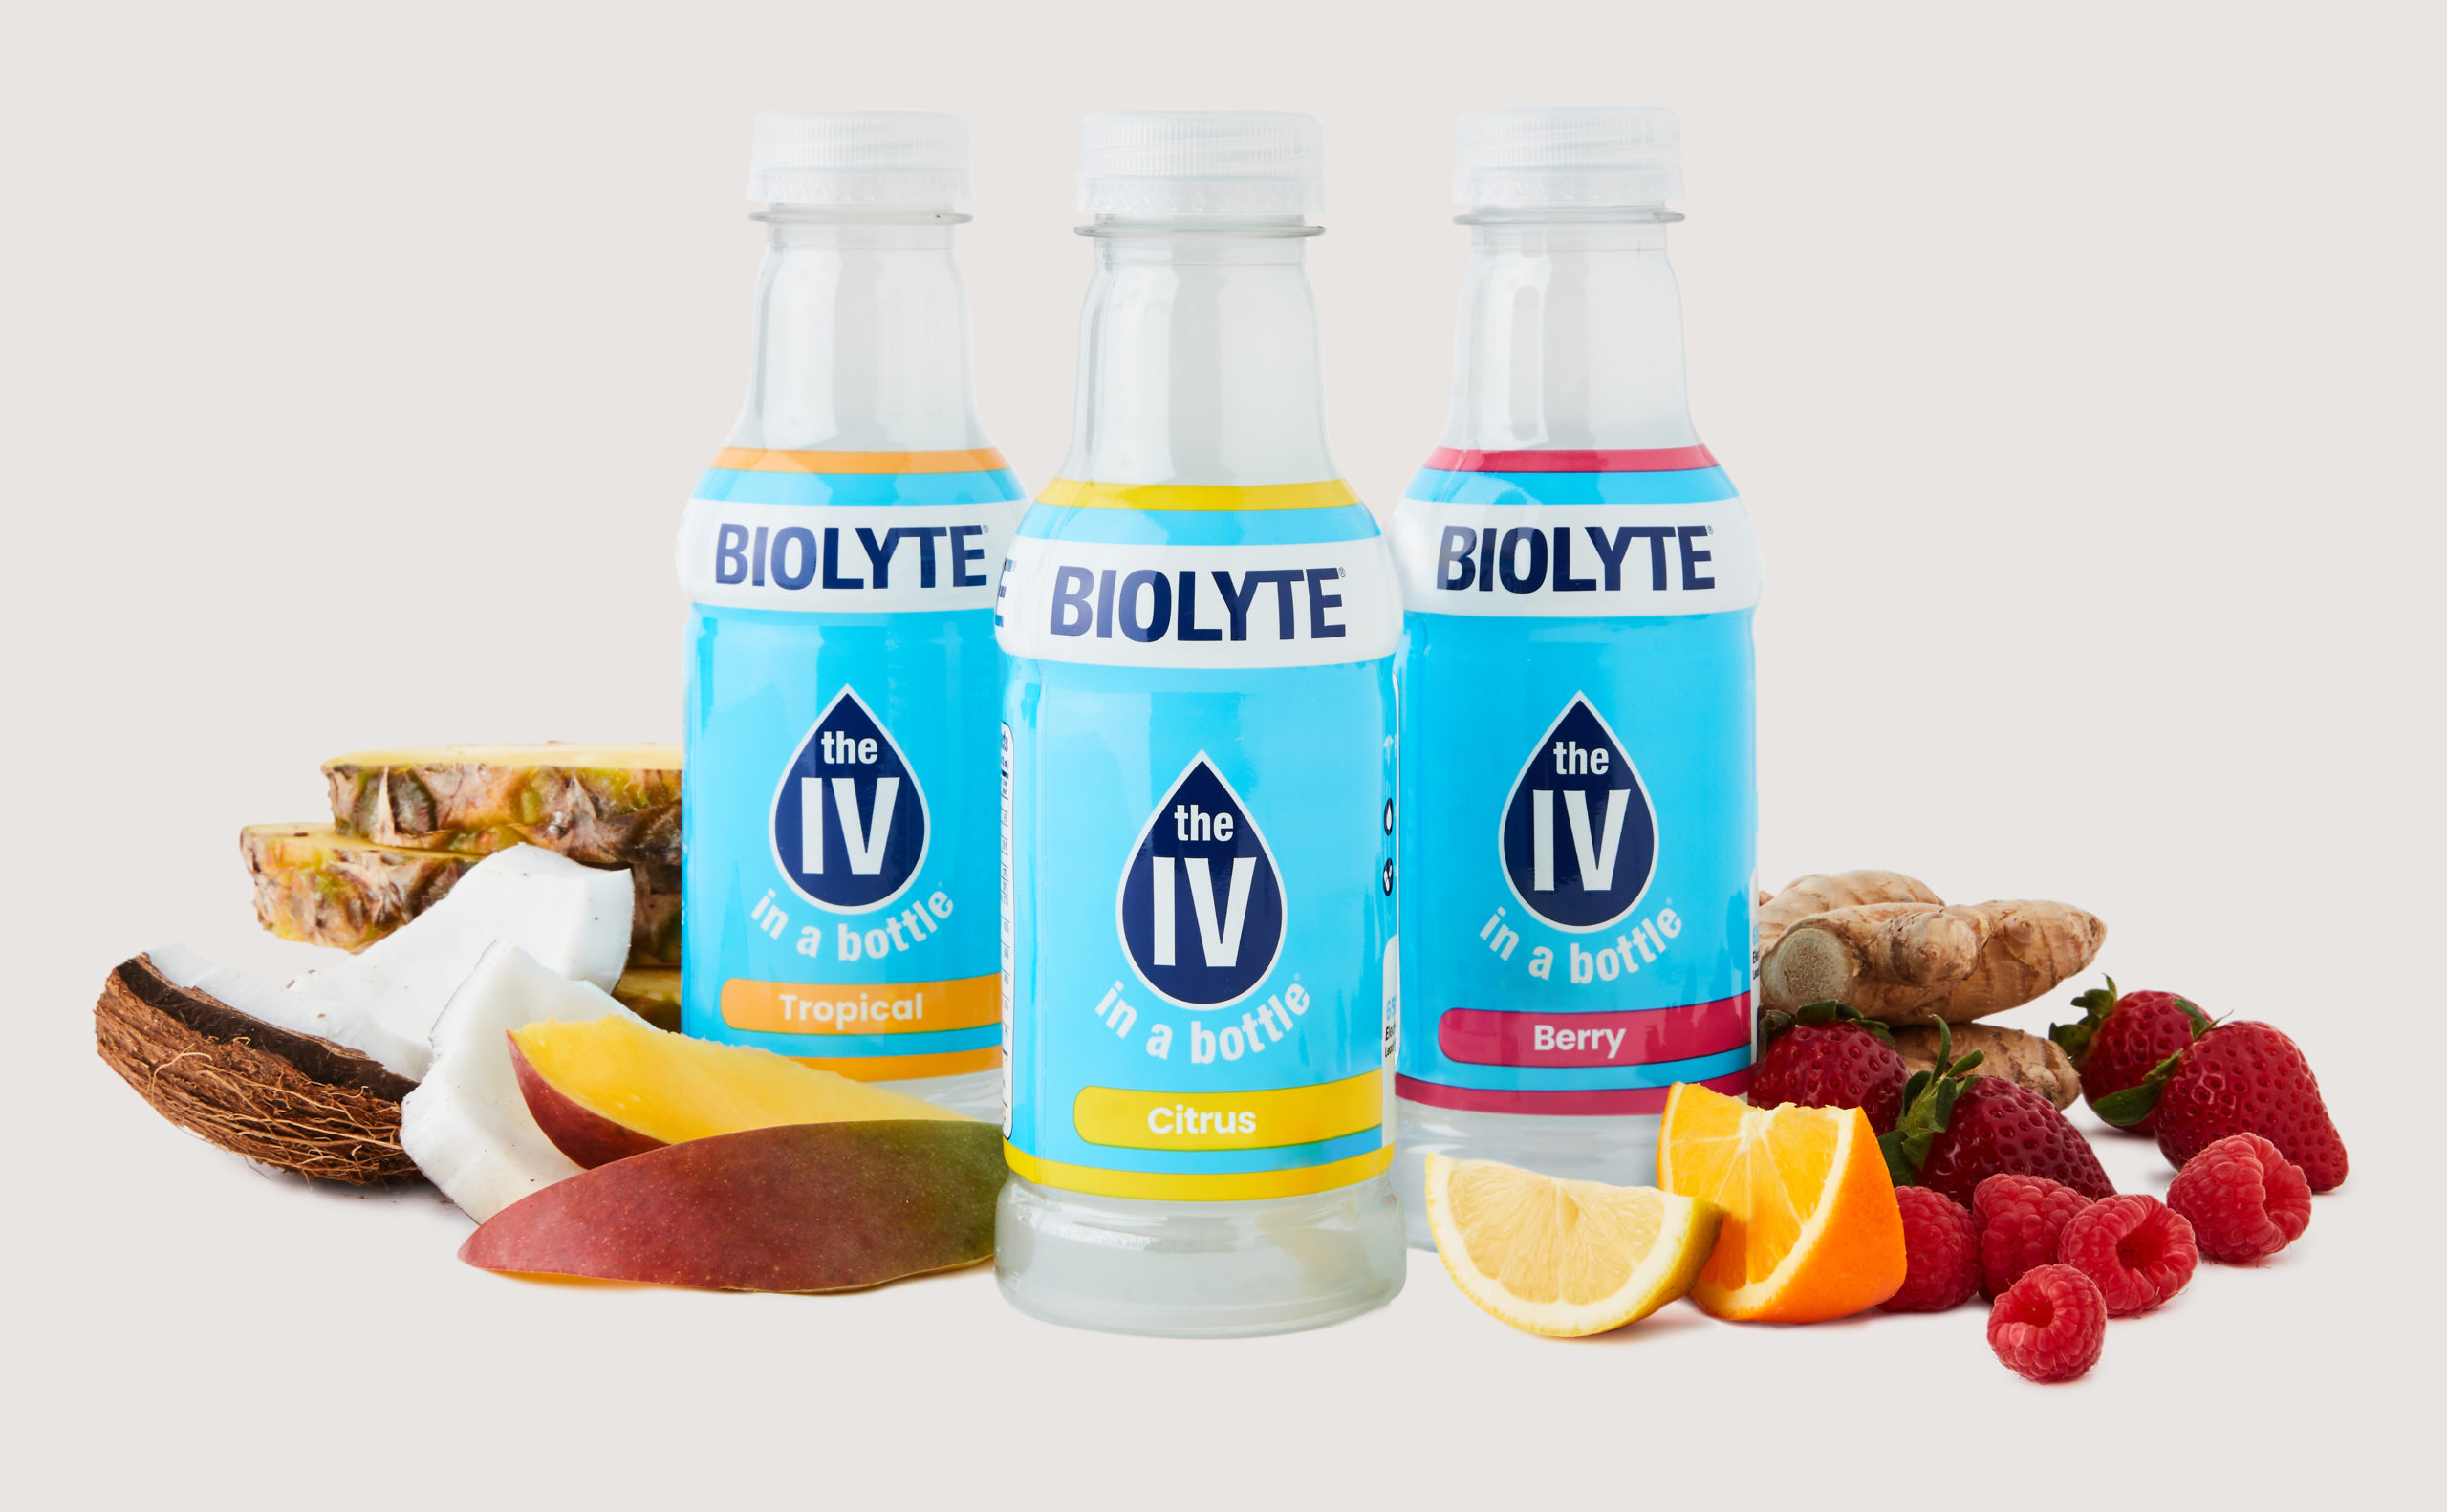 First-Of-Its-Kind "IV in a Bottle" Sports Recovery Drink Expands to DFW Market